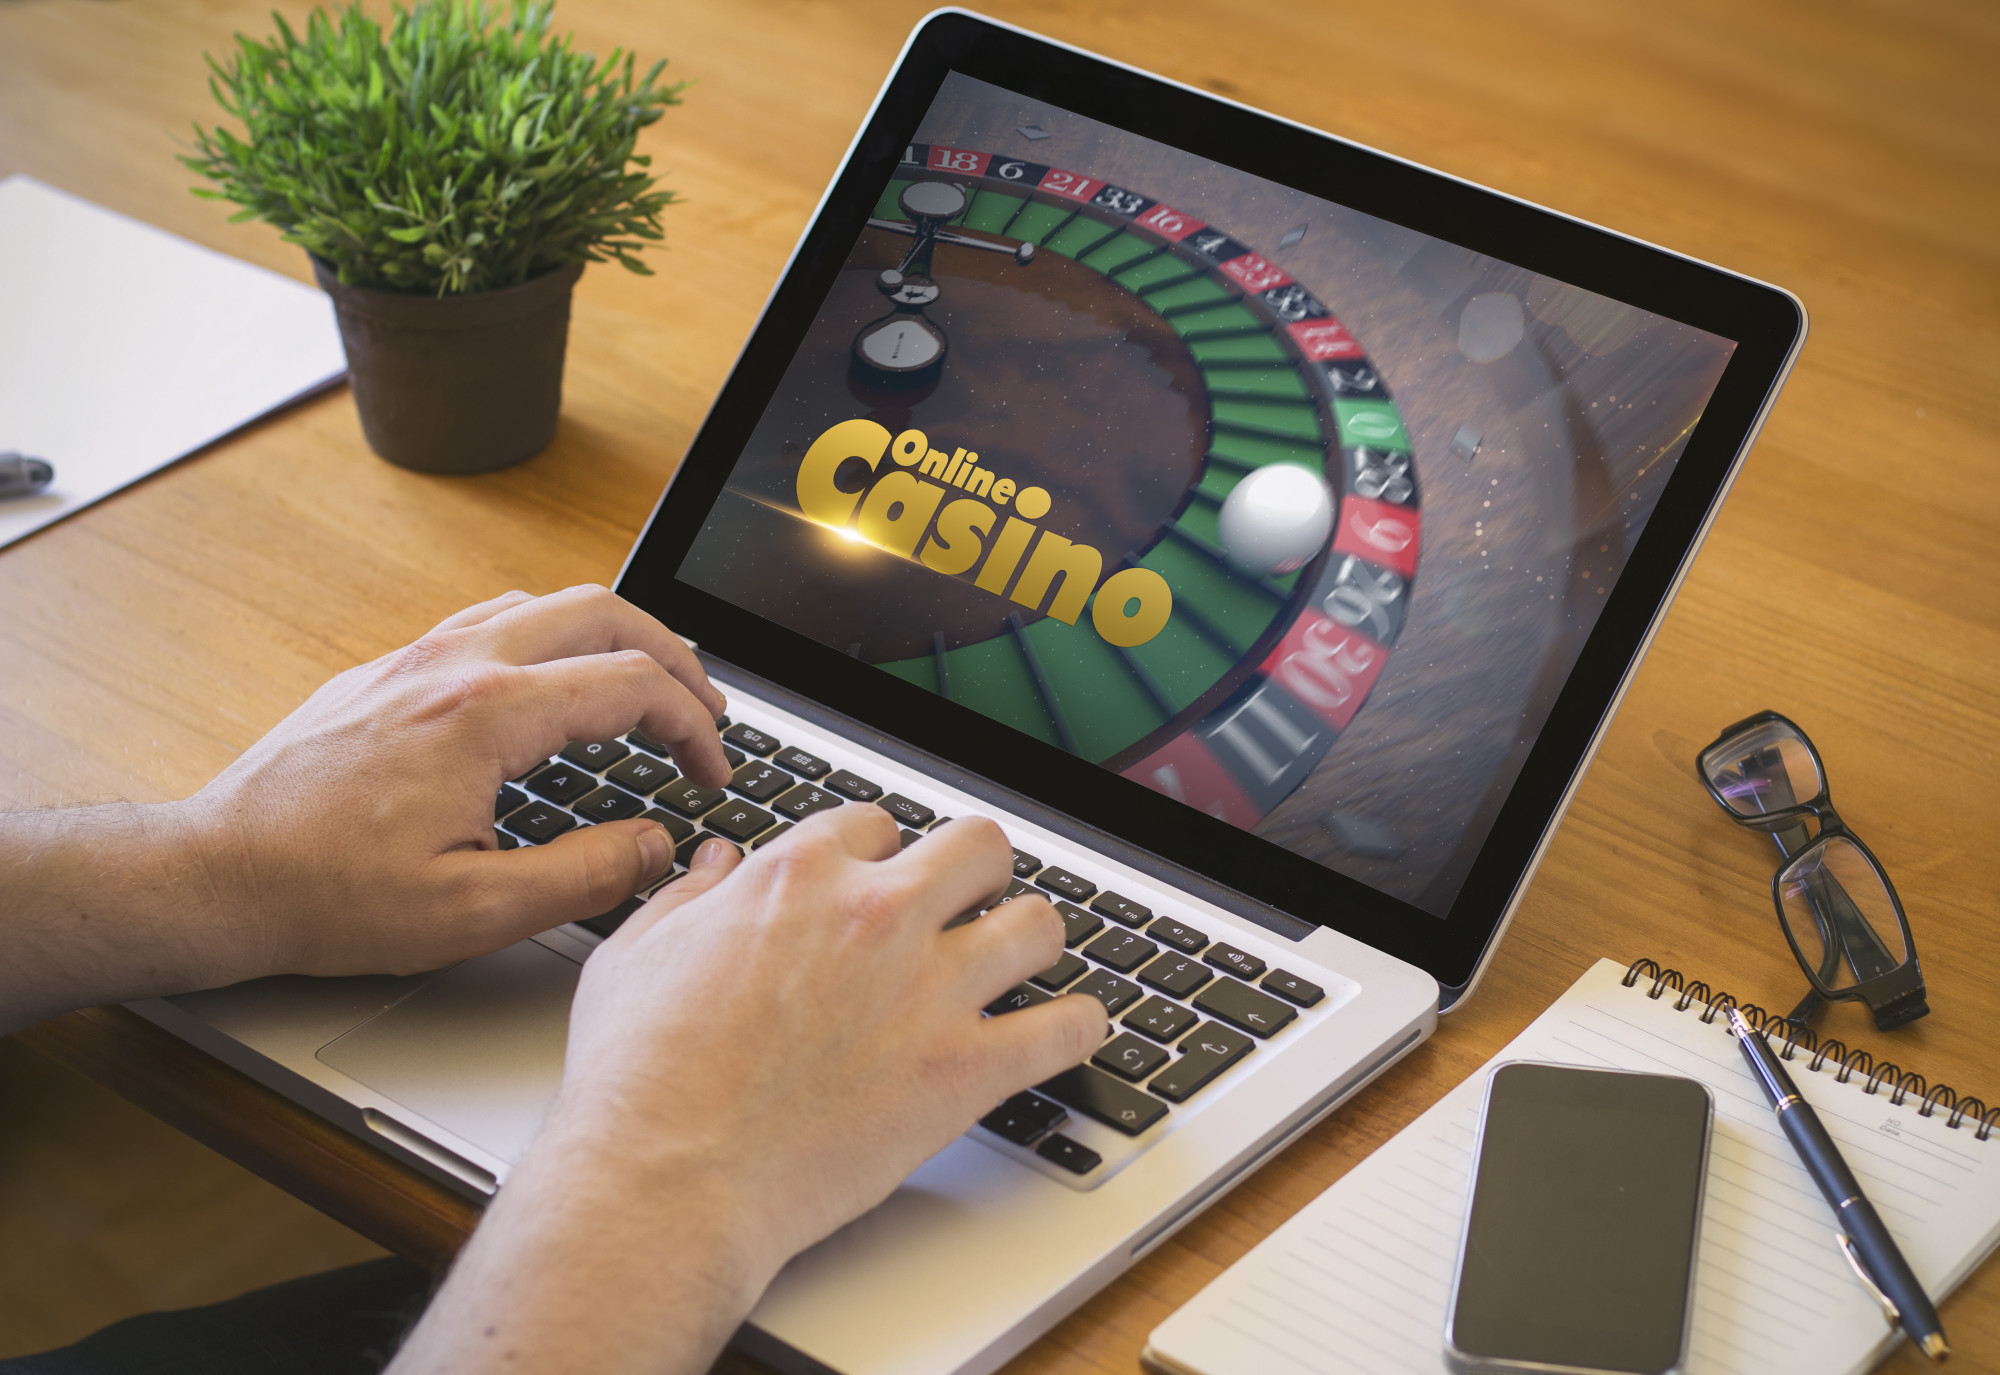 How Do I Choose the Best Online Casino That I Can Actually Trust?